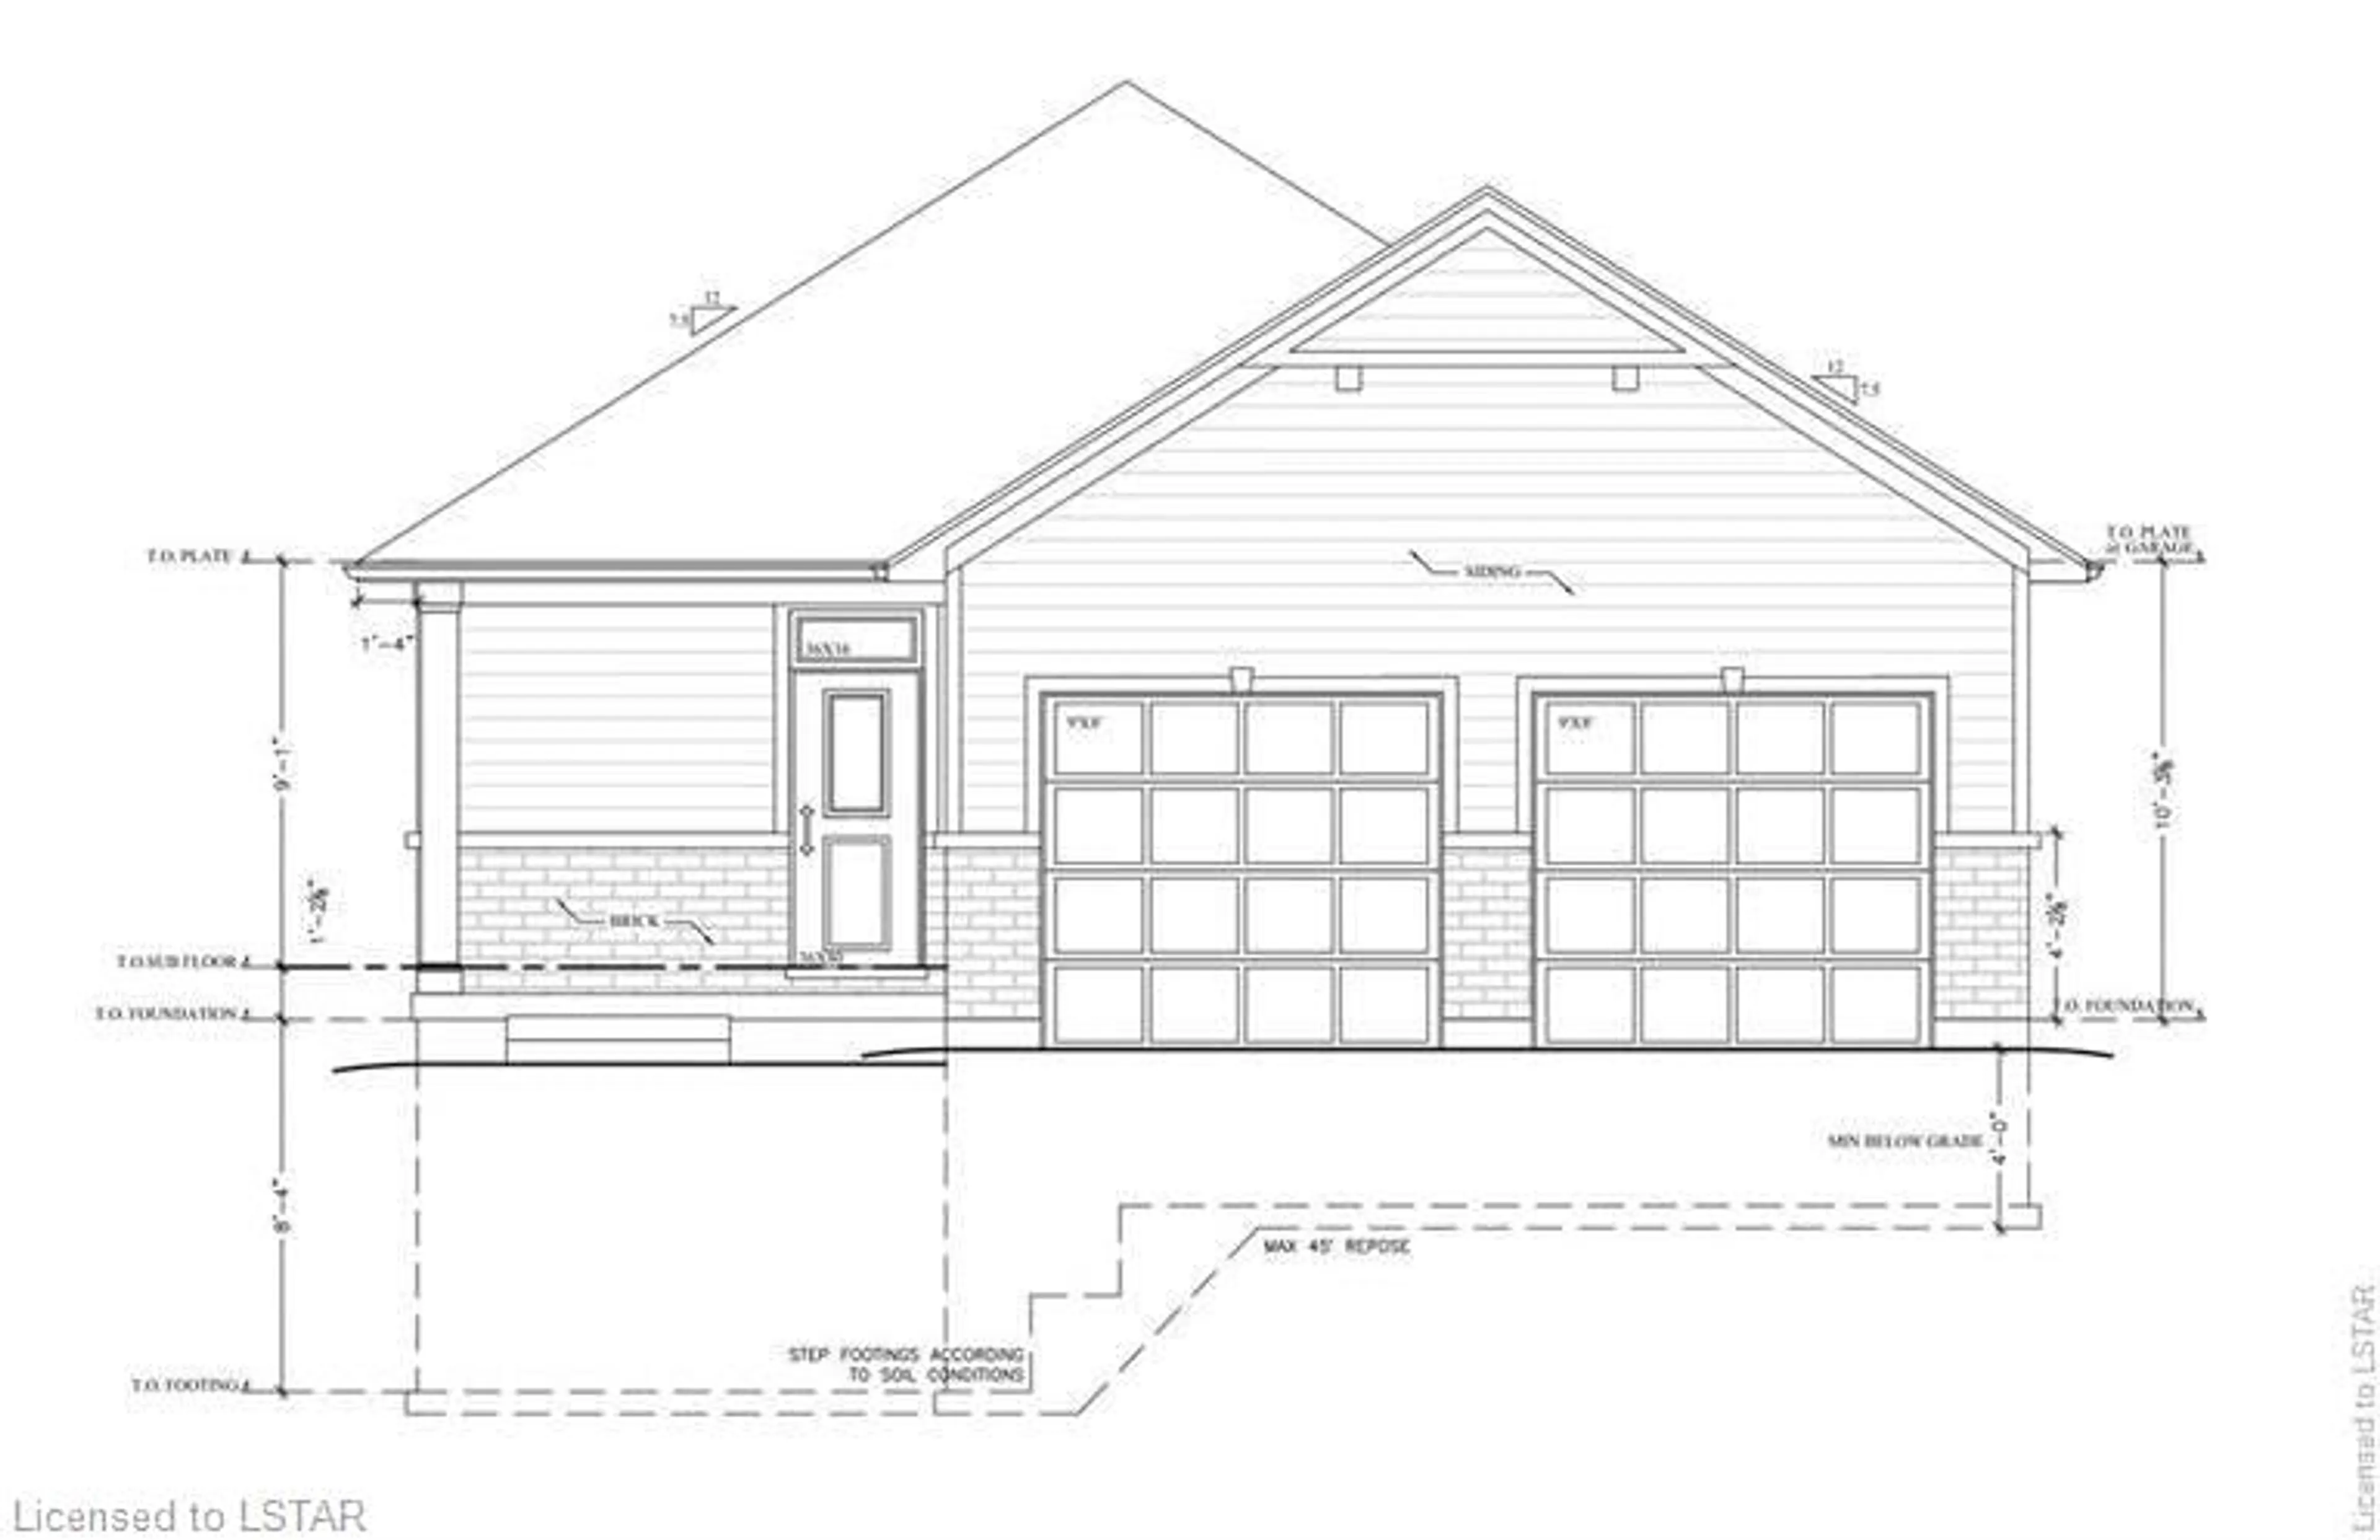 Frontside or backside of a home for LOT 9 North St, Clinton Ontario N0M 1L0